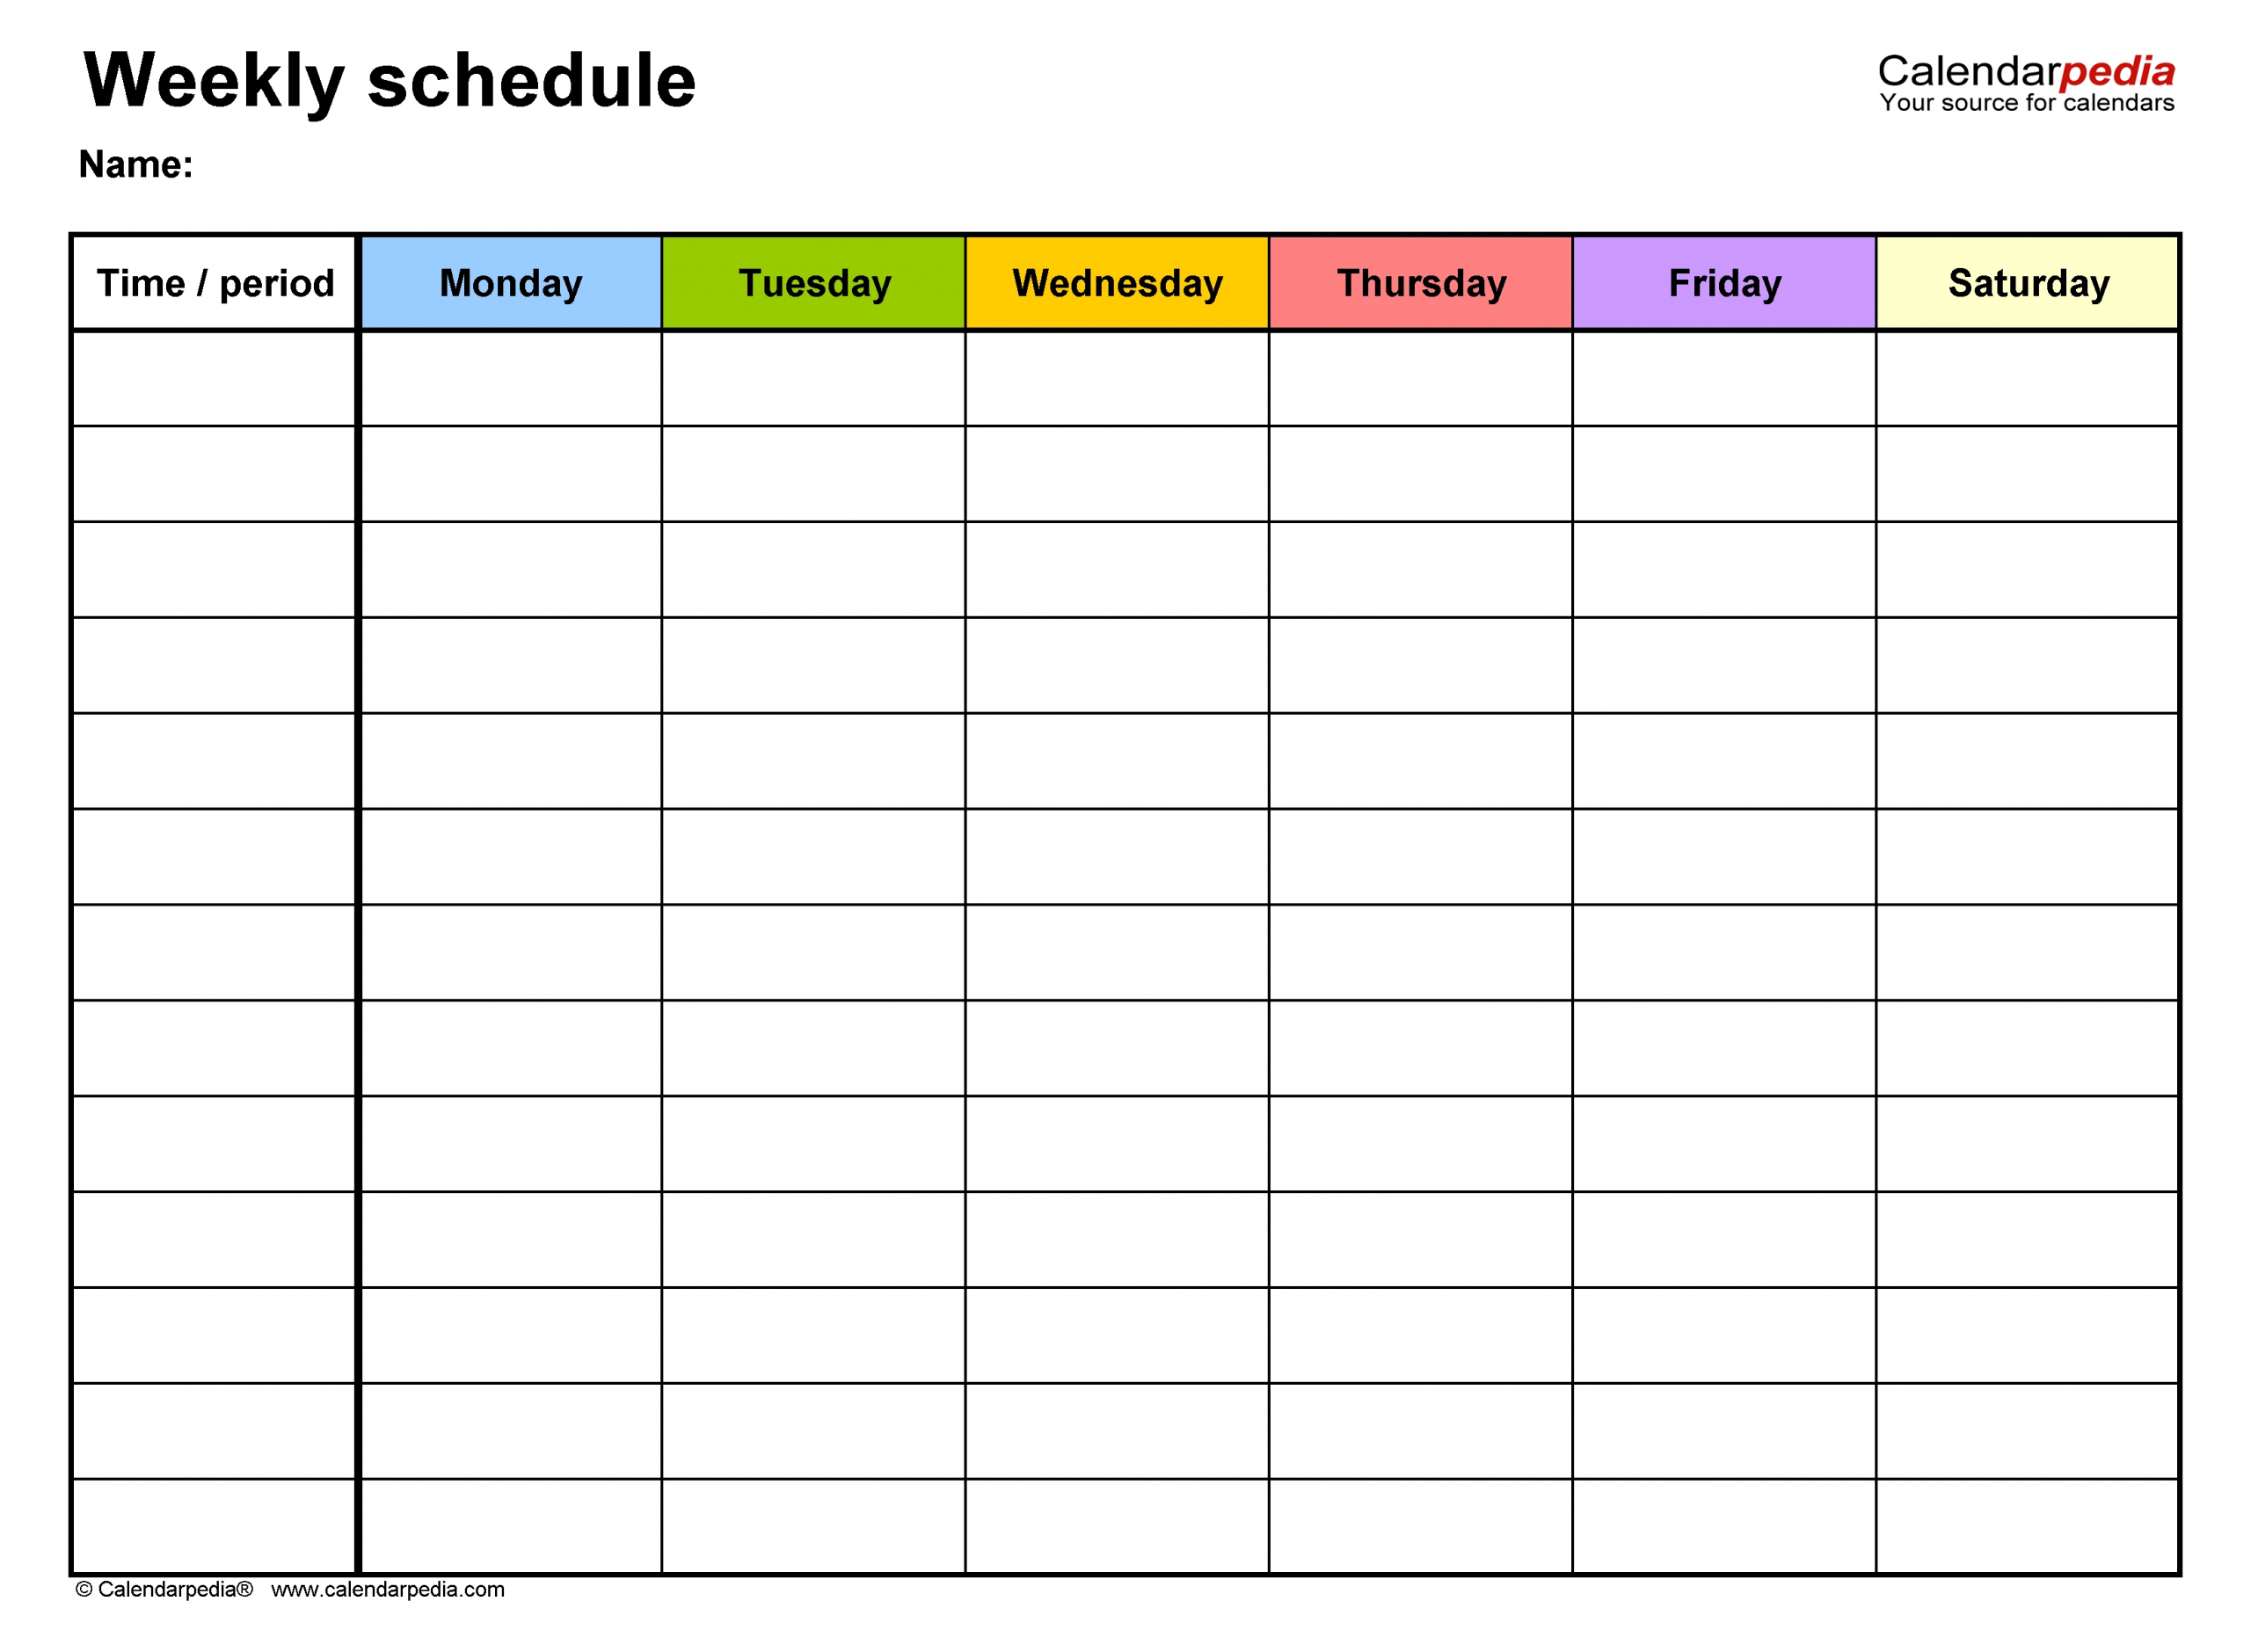 Free Weekly Schedule Templates For Excel - 18 Templates  Excel Calendar Week